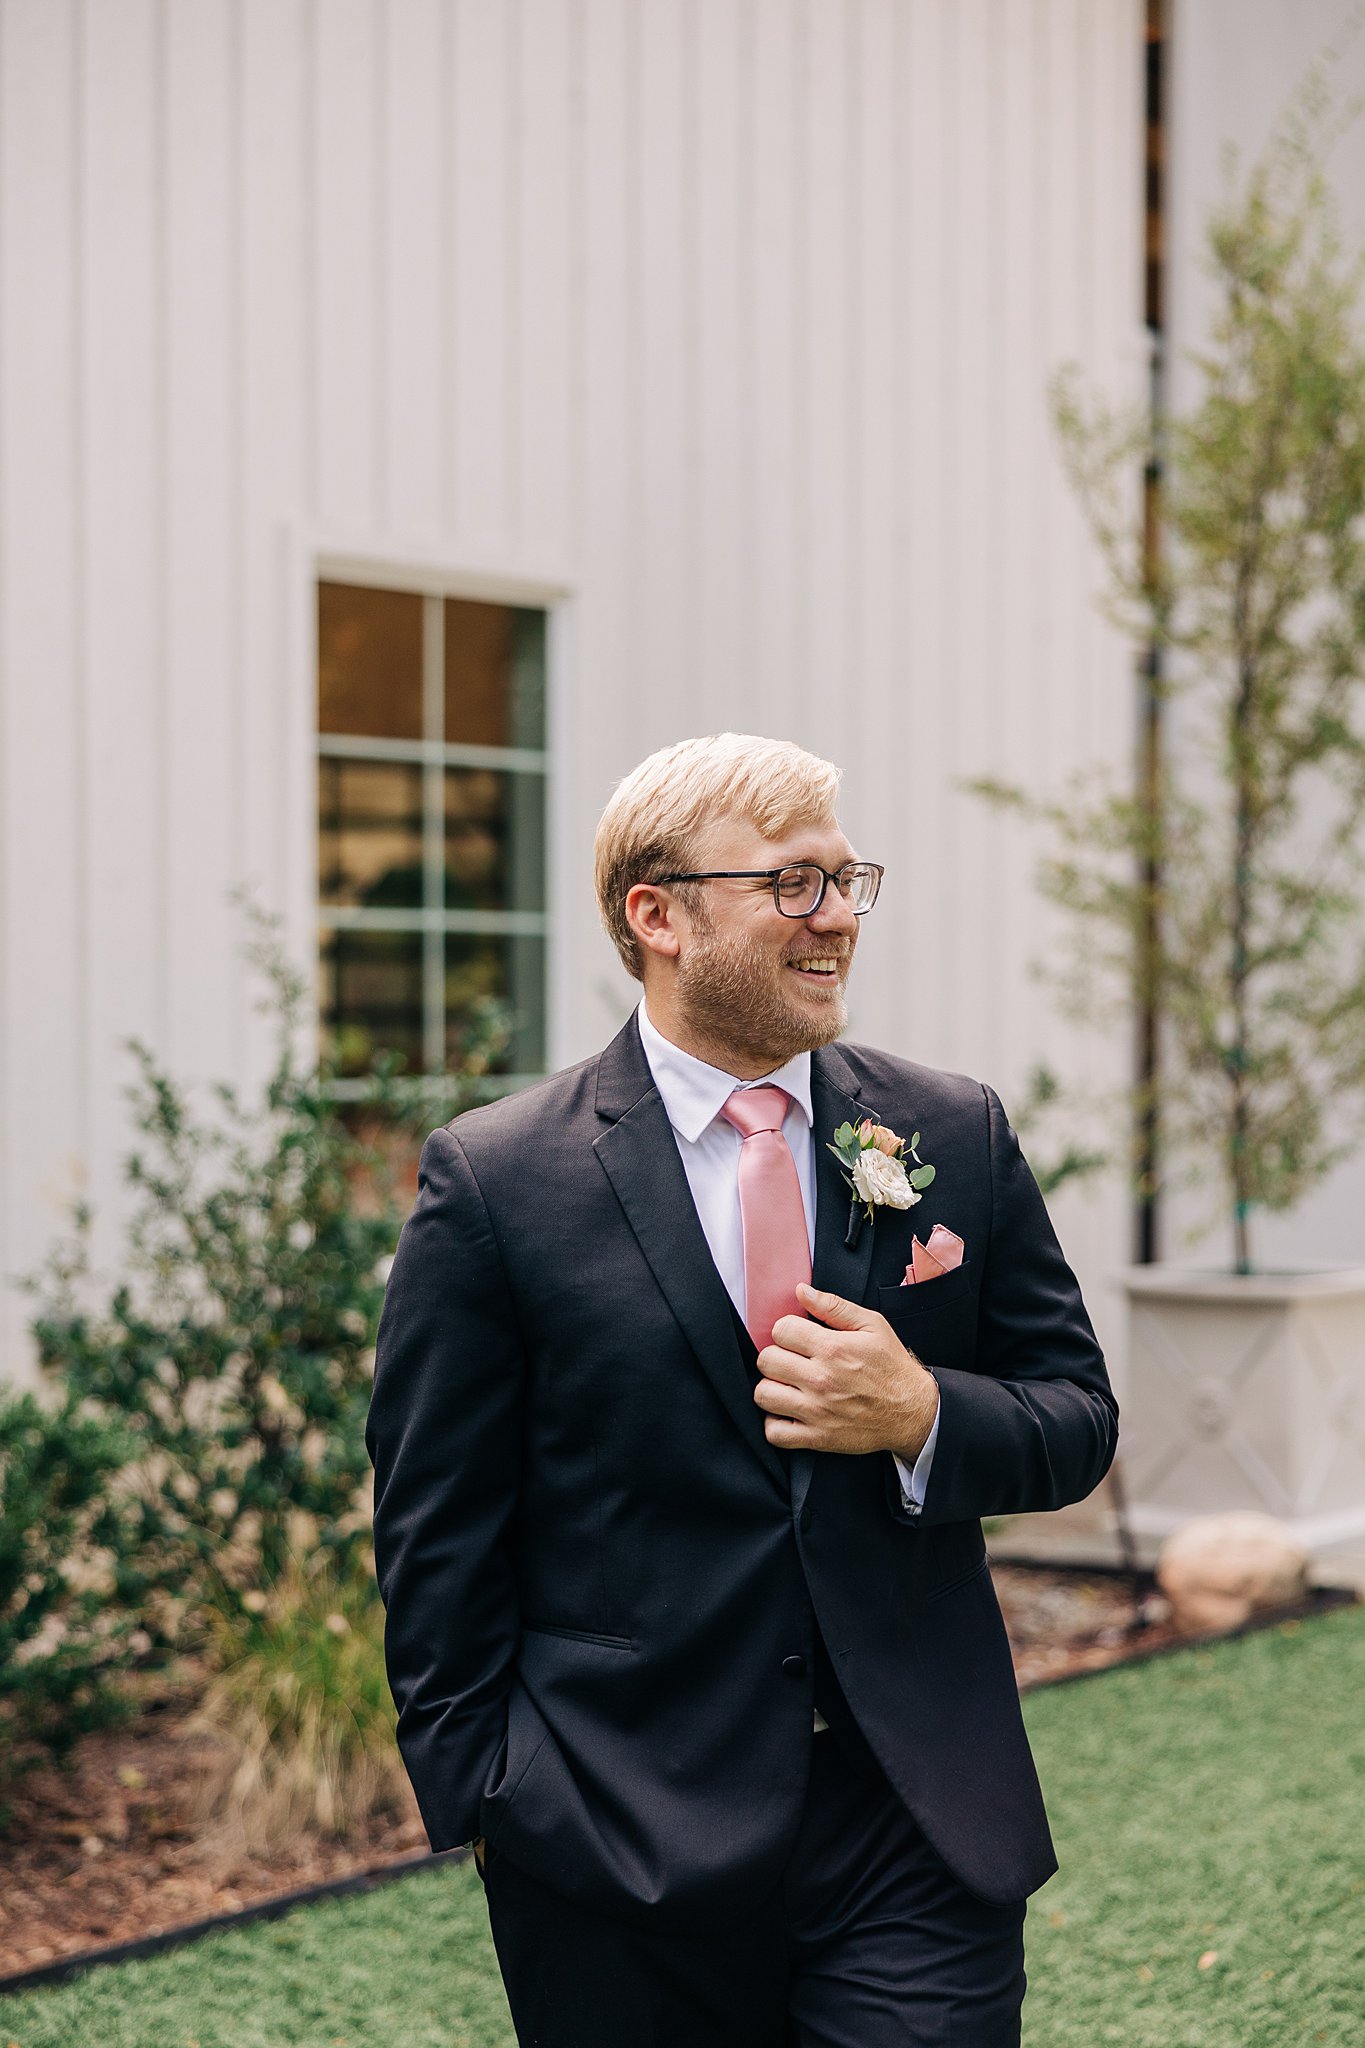 A groom laughs while standing in a garden in a black suit with pink accents